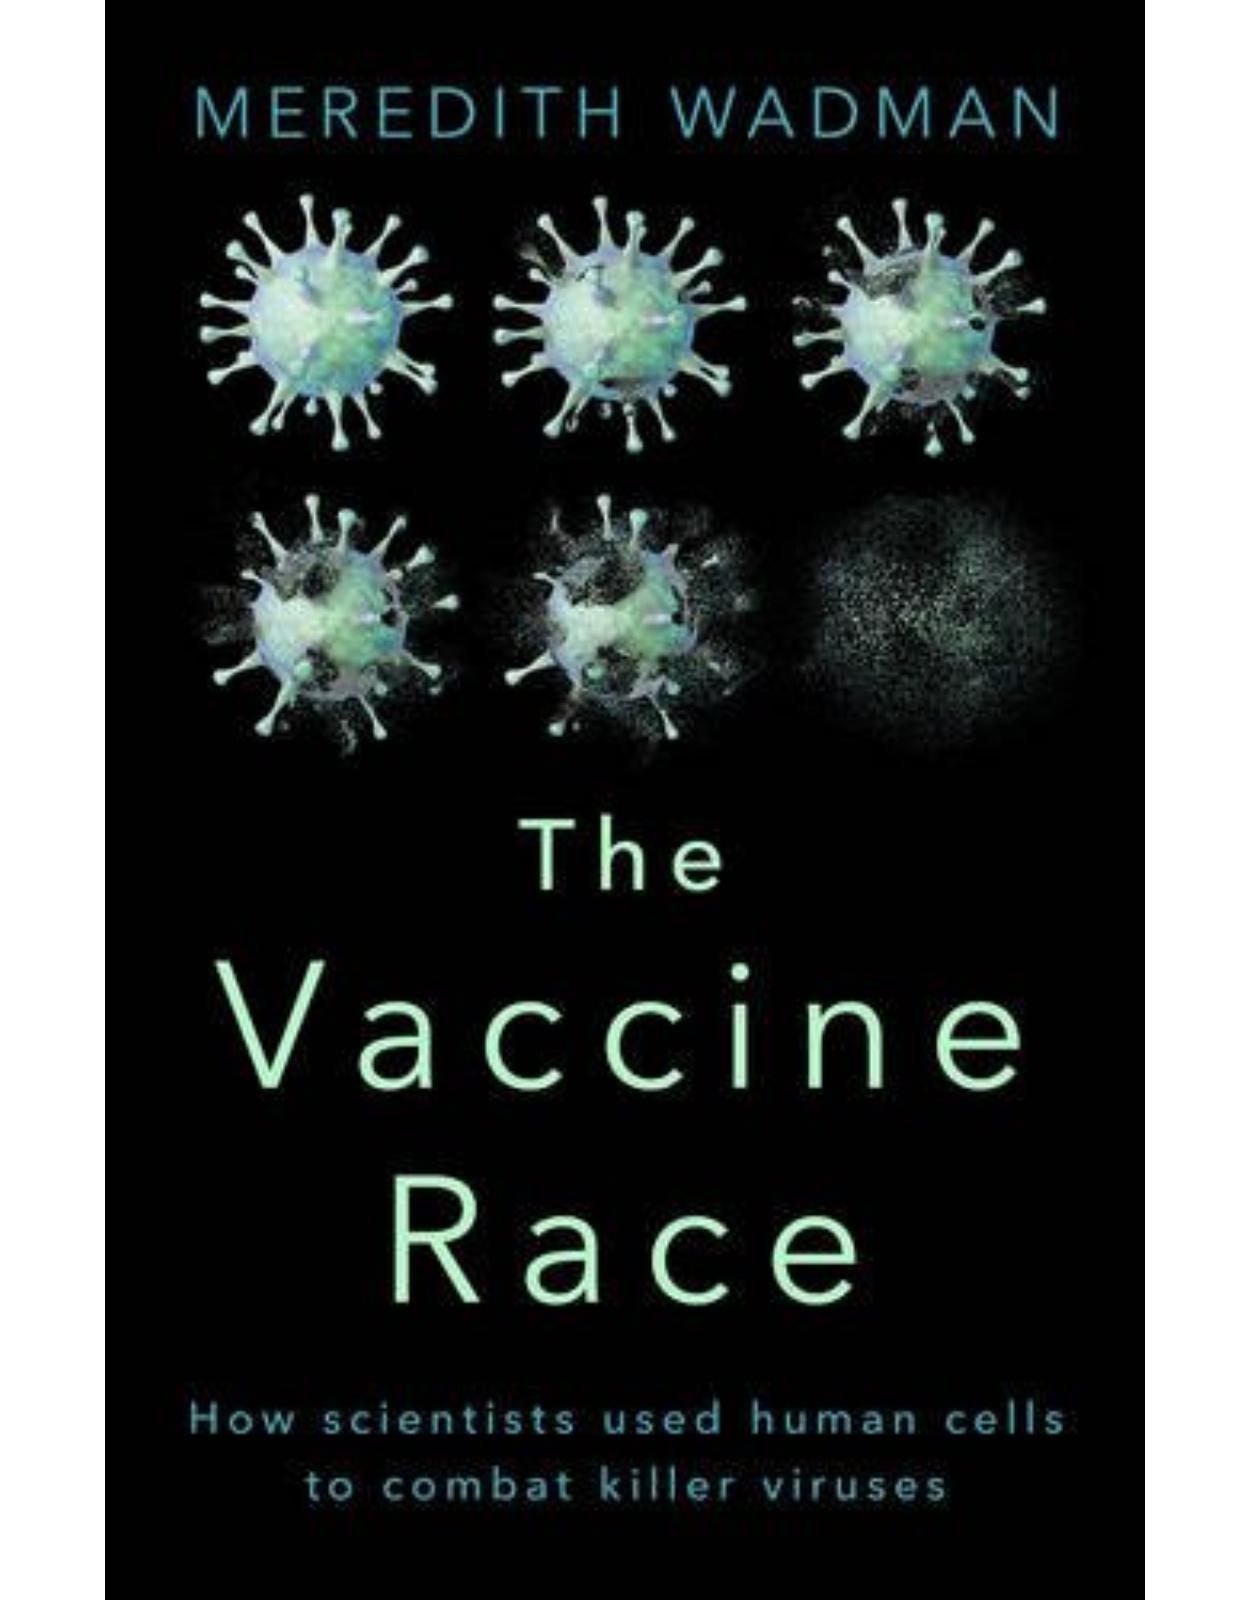 The Vaccine Race: How Scientists used Human Cells to Combat Killer Viruses